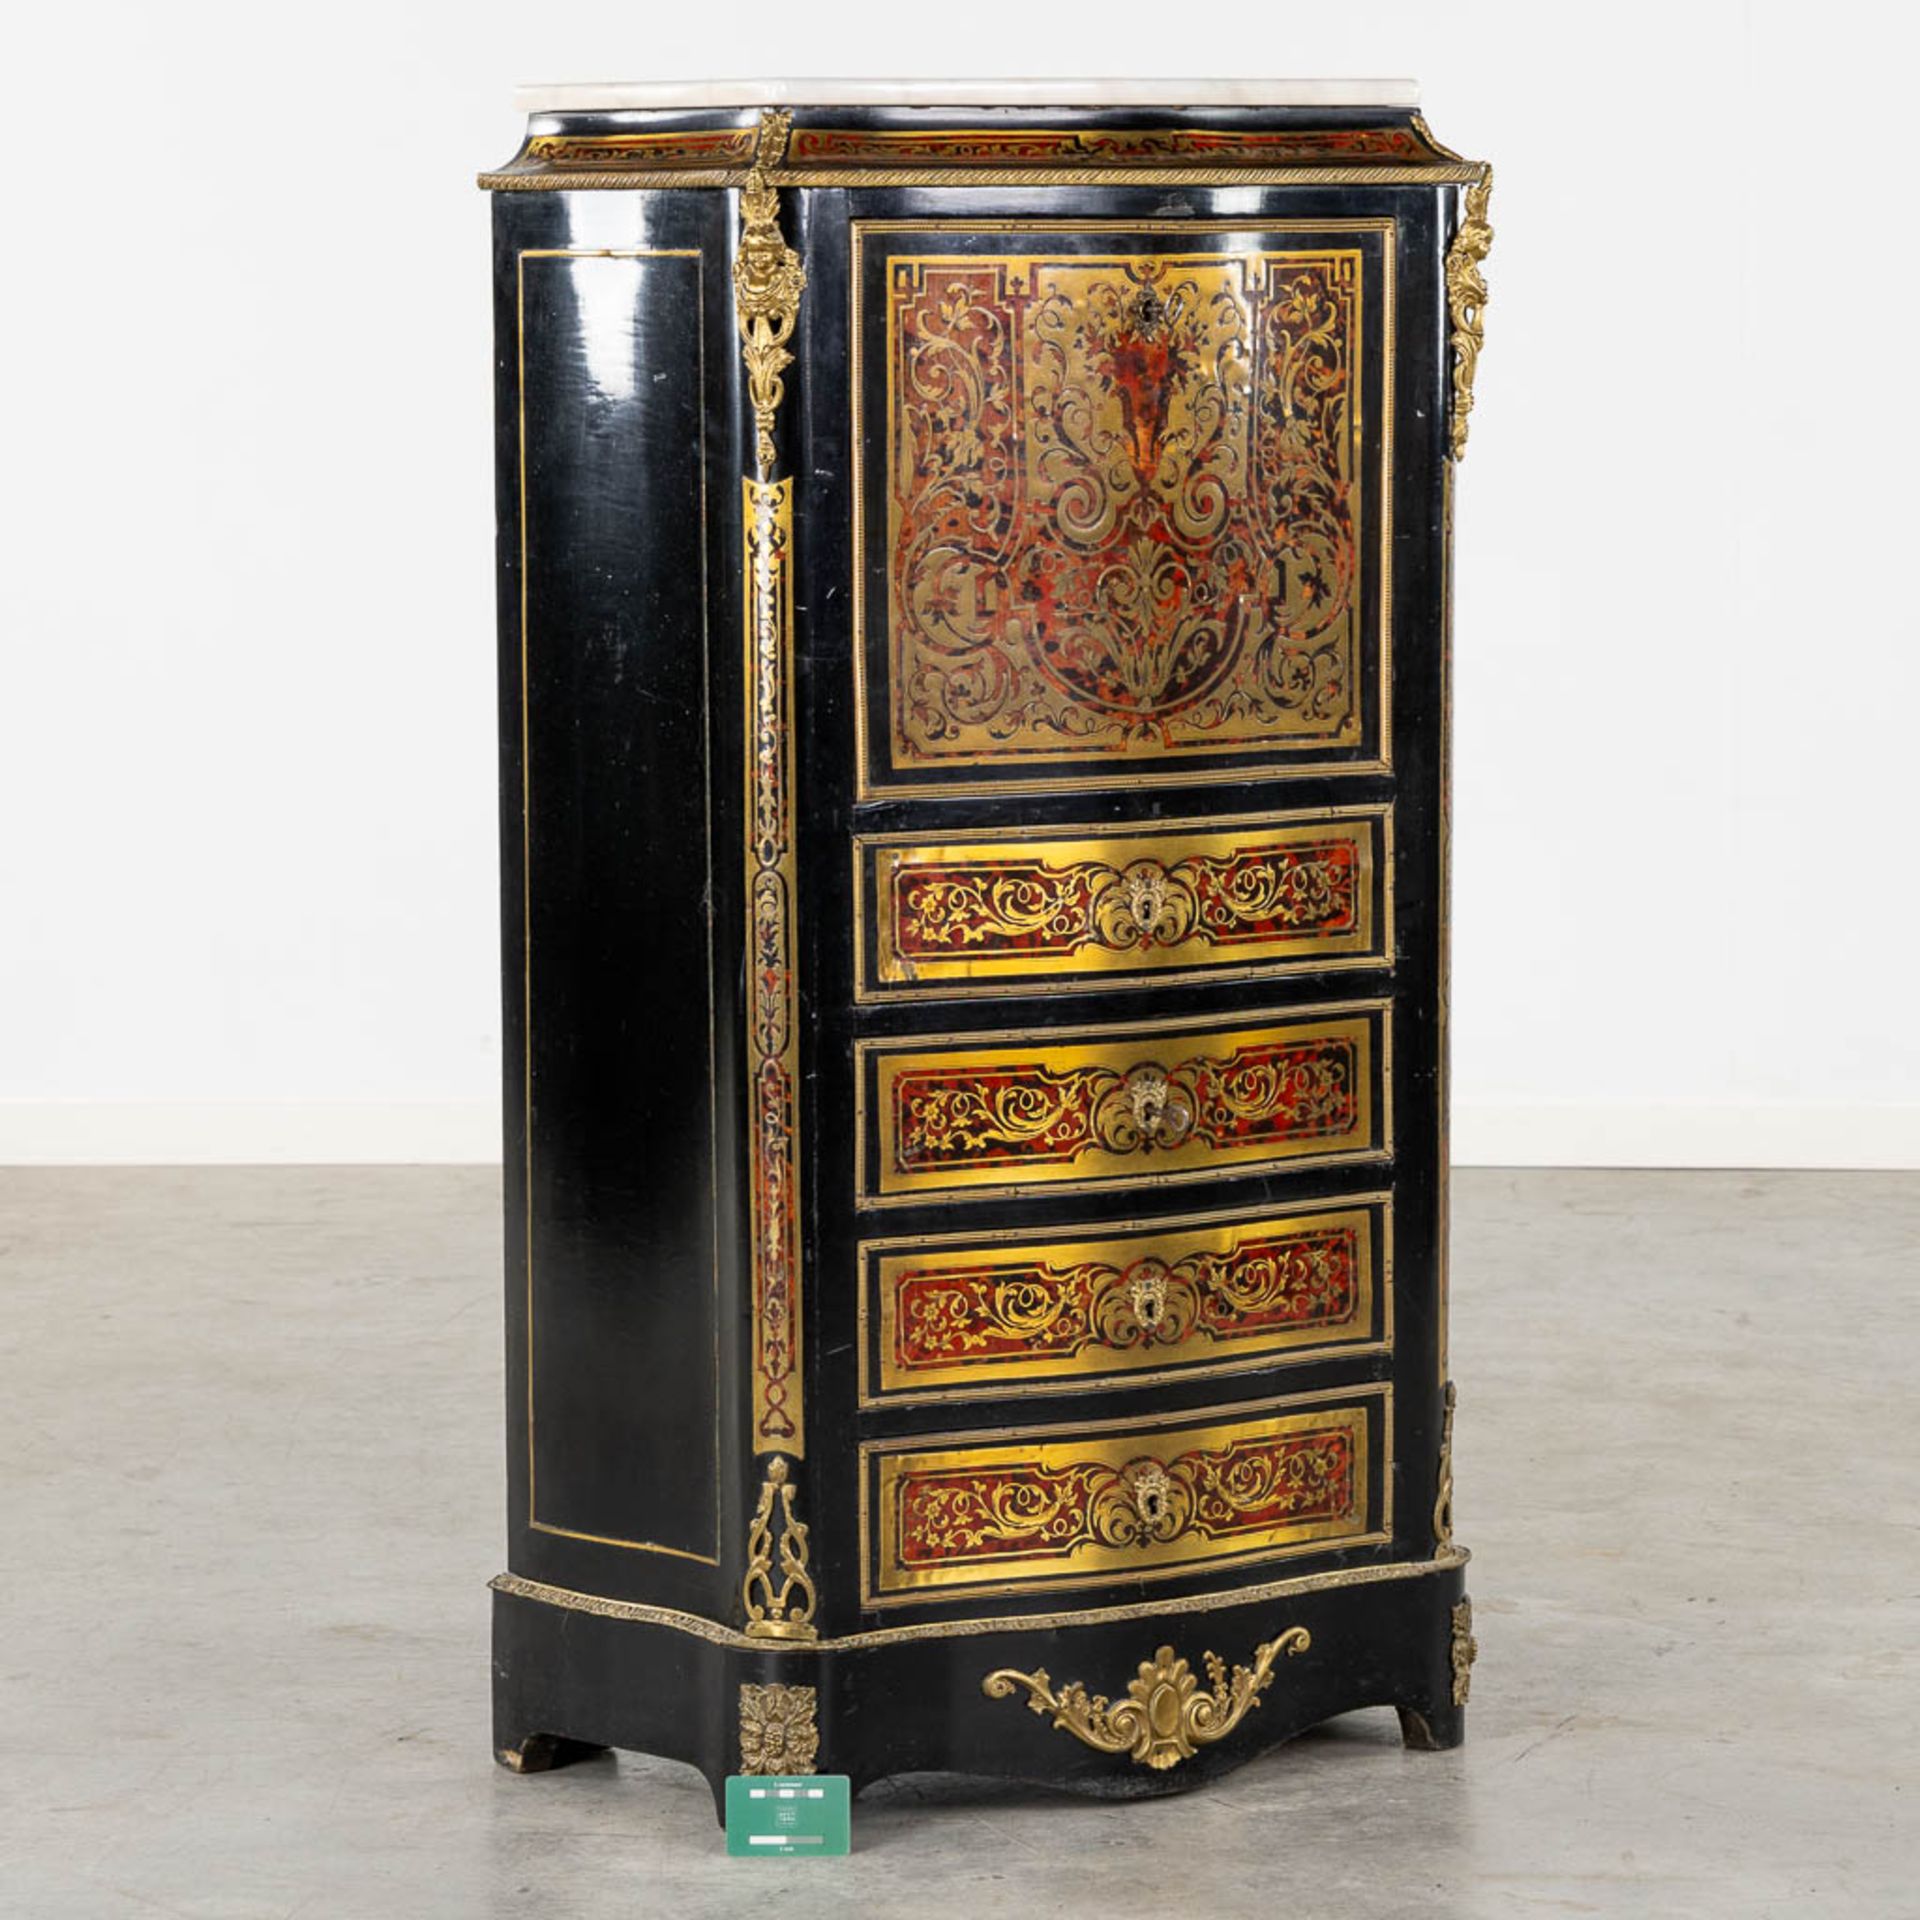 A Boulle inlay secretaire cabinet, Napoleon 3 period, 19th C. (L:36 x W:75 x H:122 cm) - Image 2 of 18